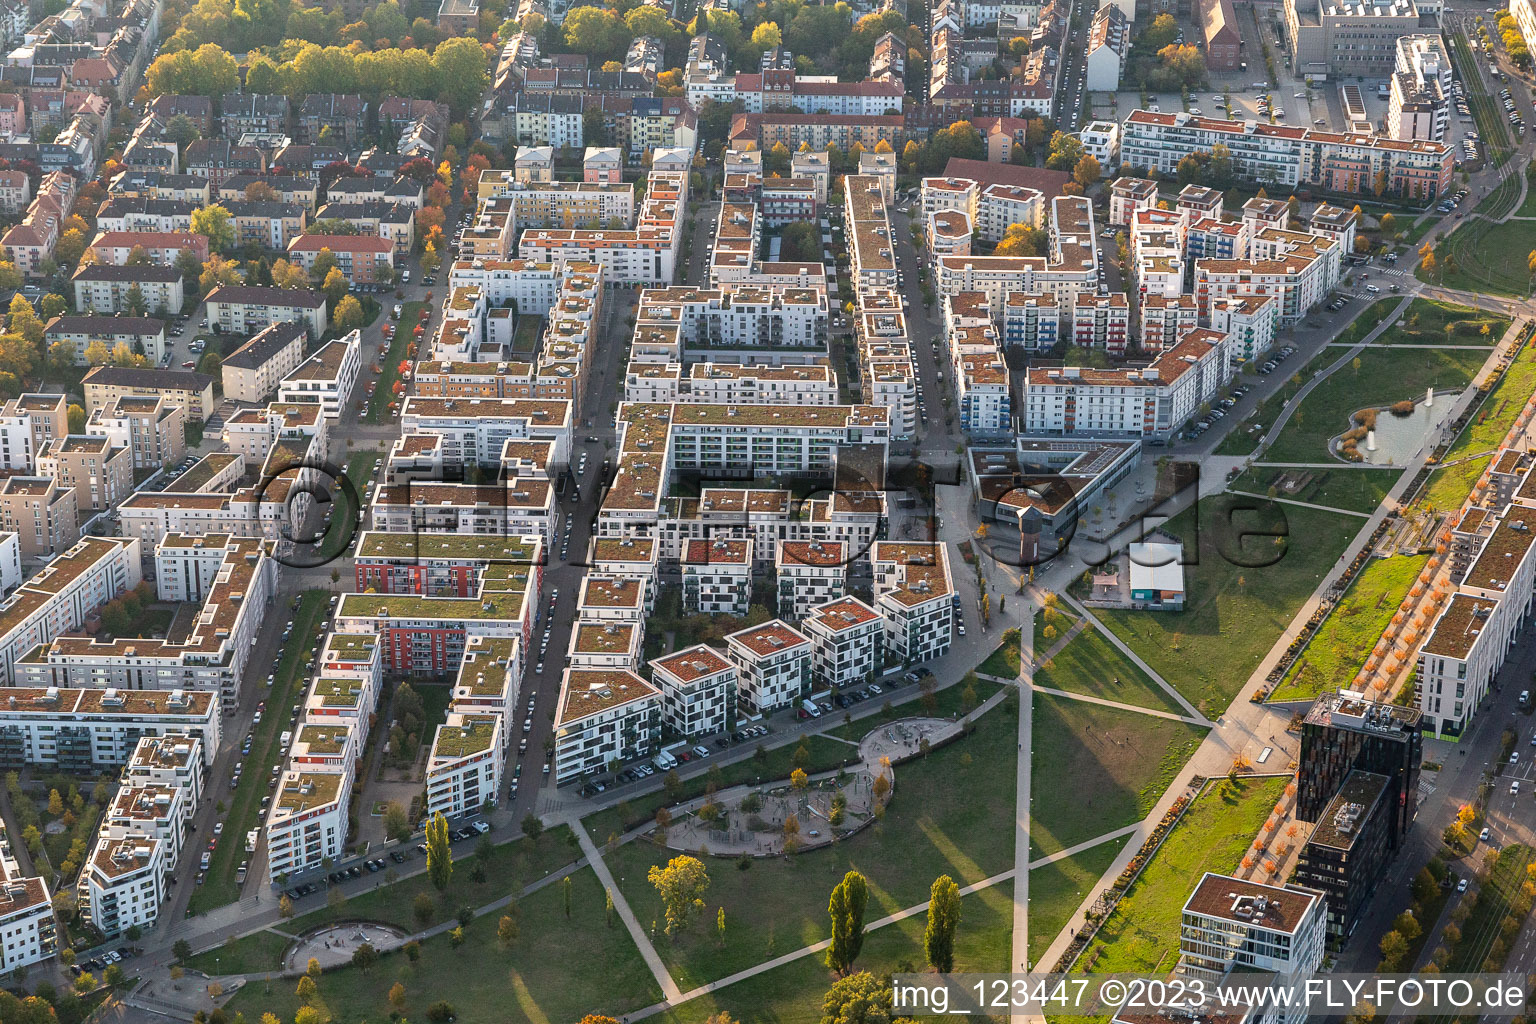 Development area of the decommissioned and unused land and real estate modern settlement Citypark (Stadtpark south east ) on Ludwig Erhard Allee in Karlsruhe in the state Baden-Wuerttemberg, Germany